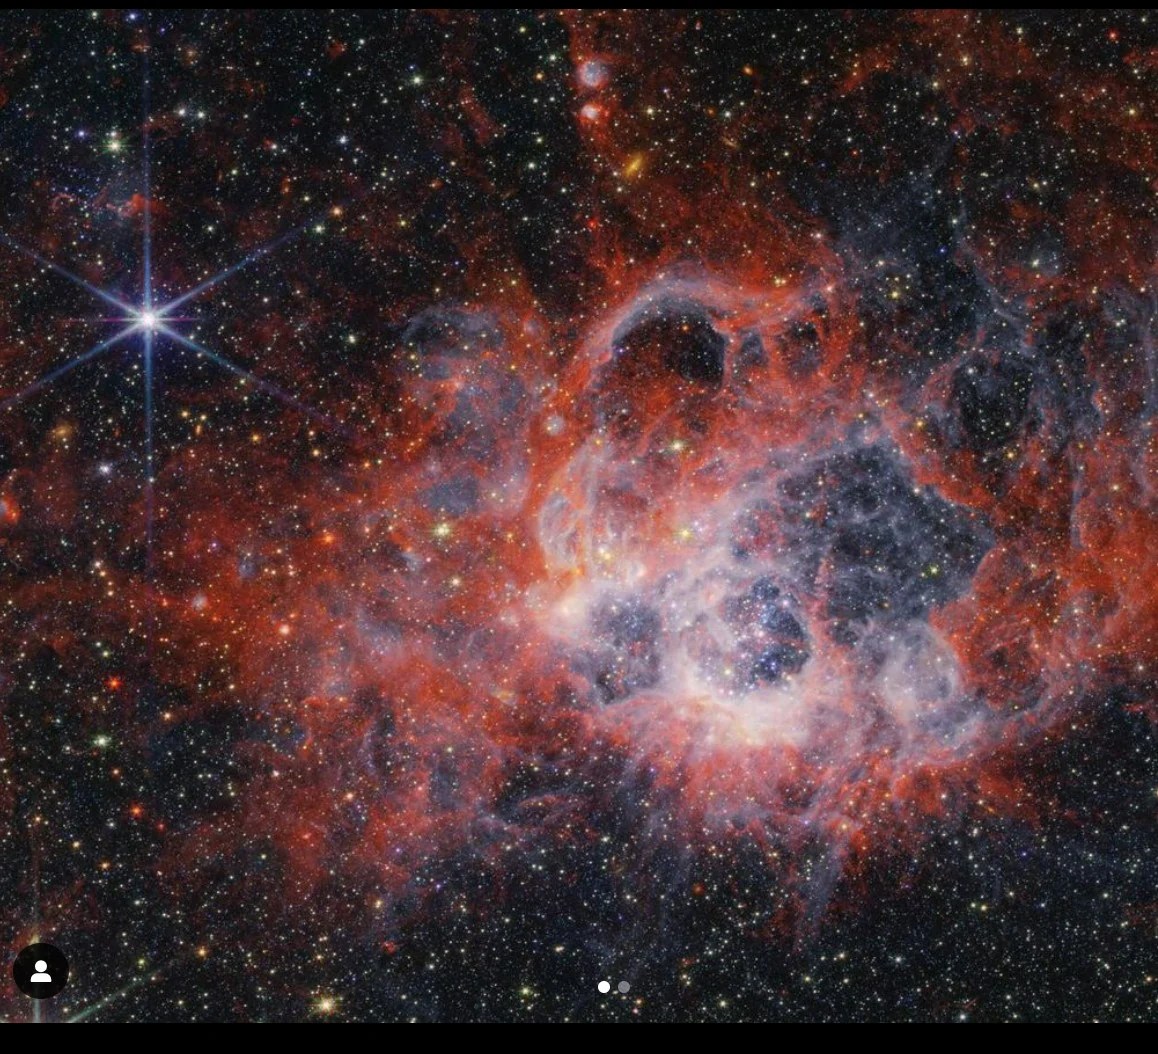 Another star forming region in space, NGC 604